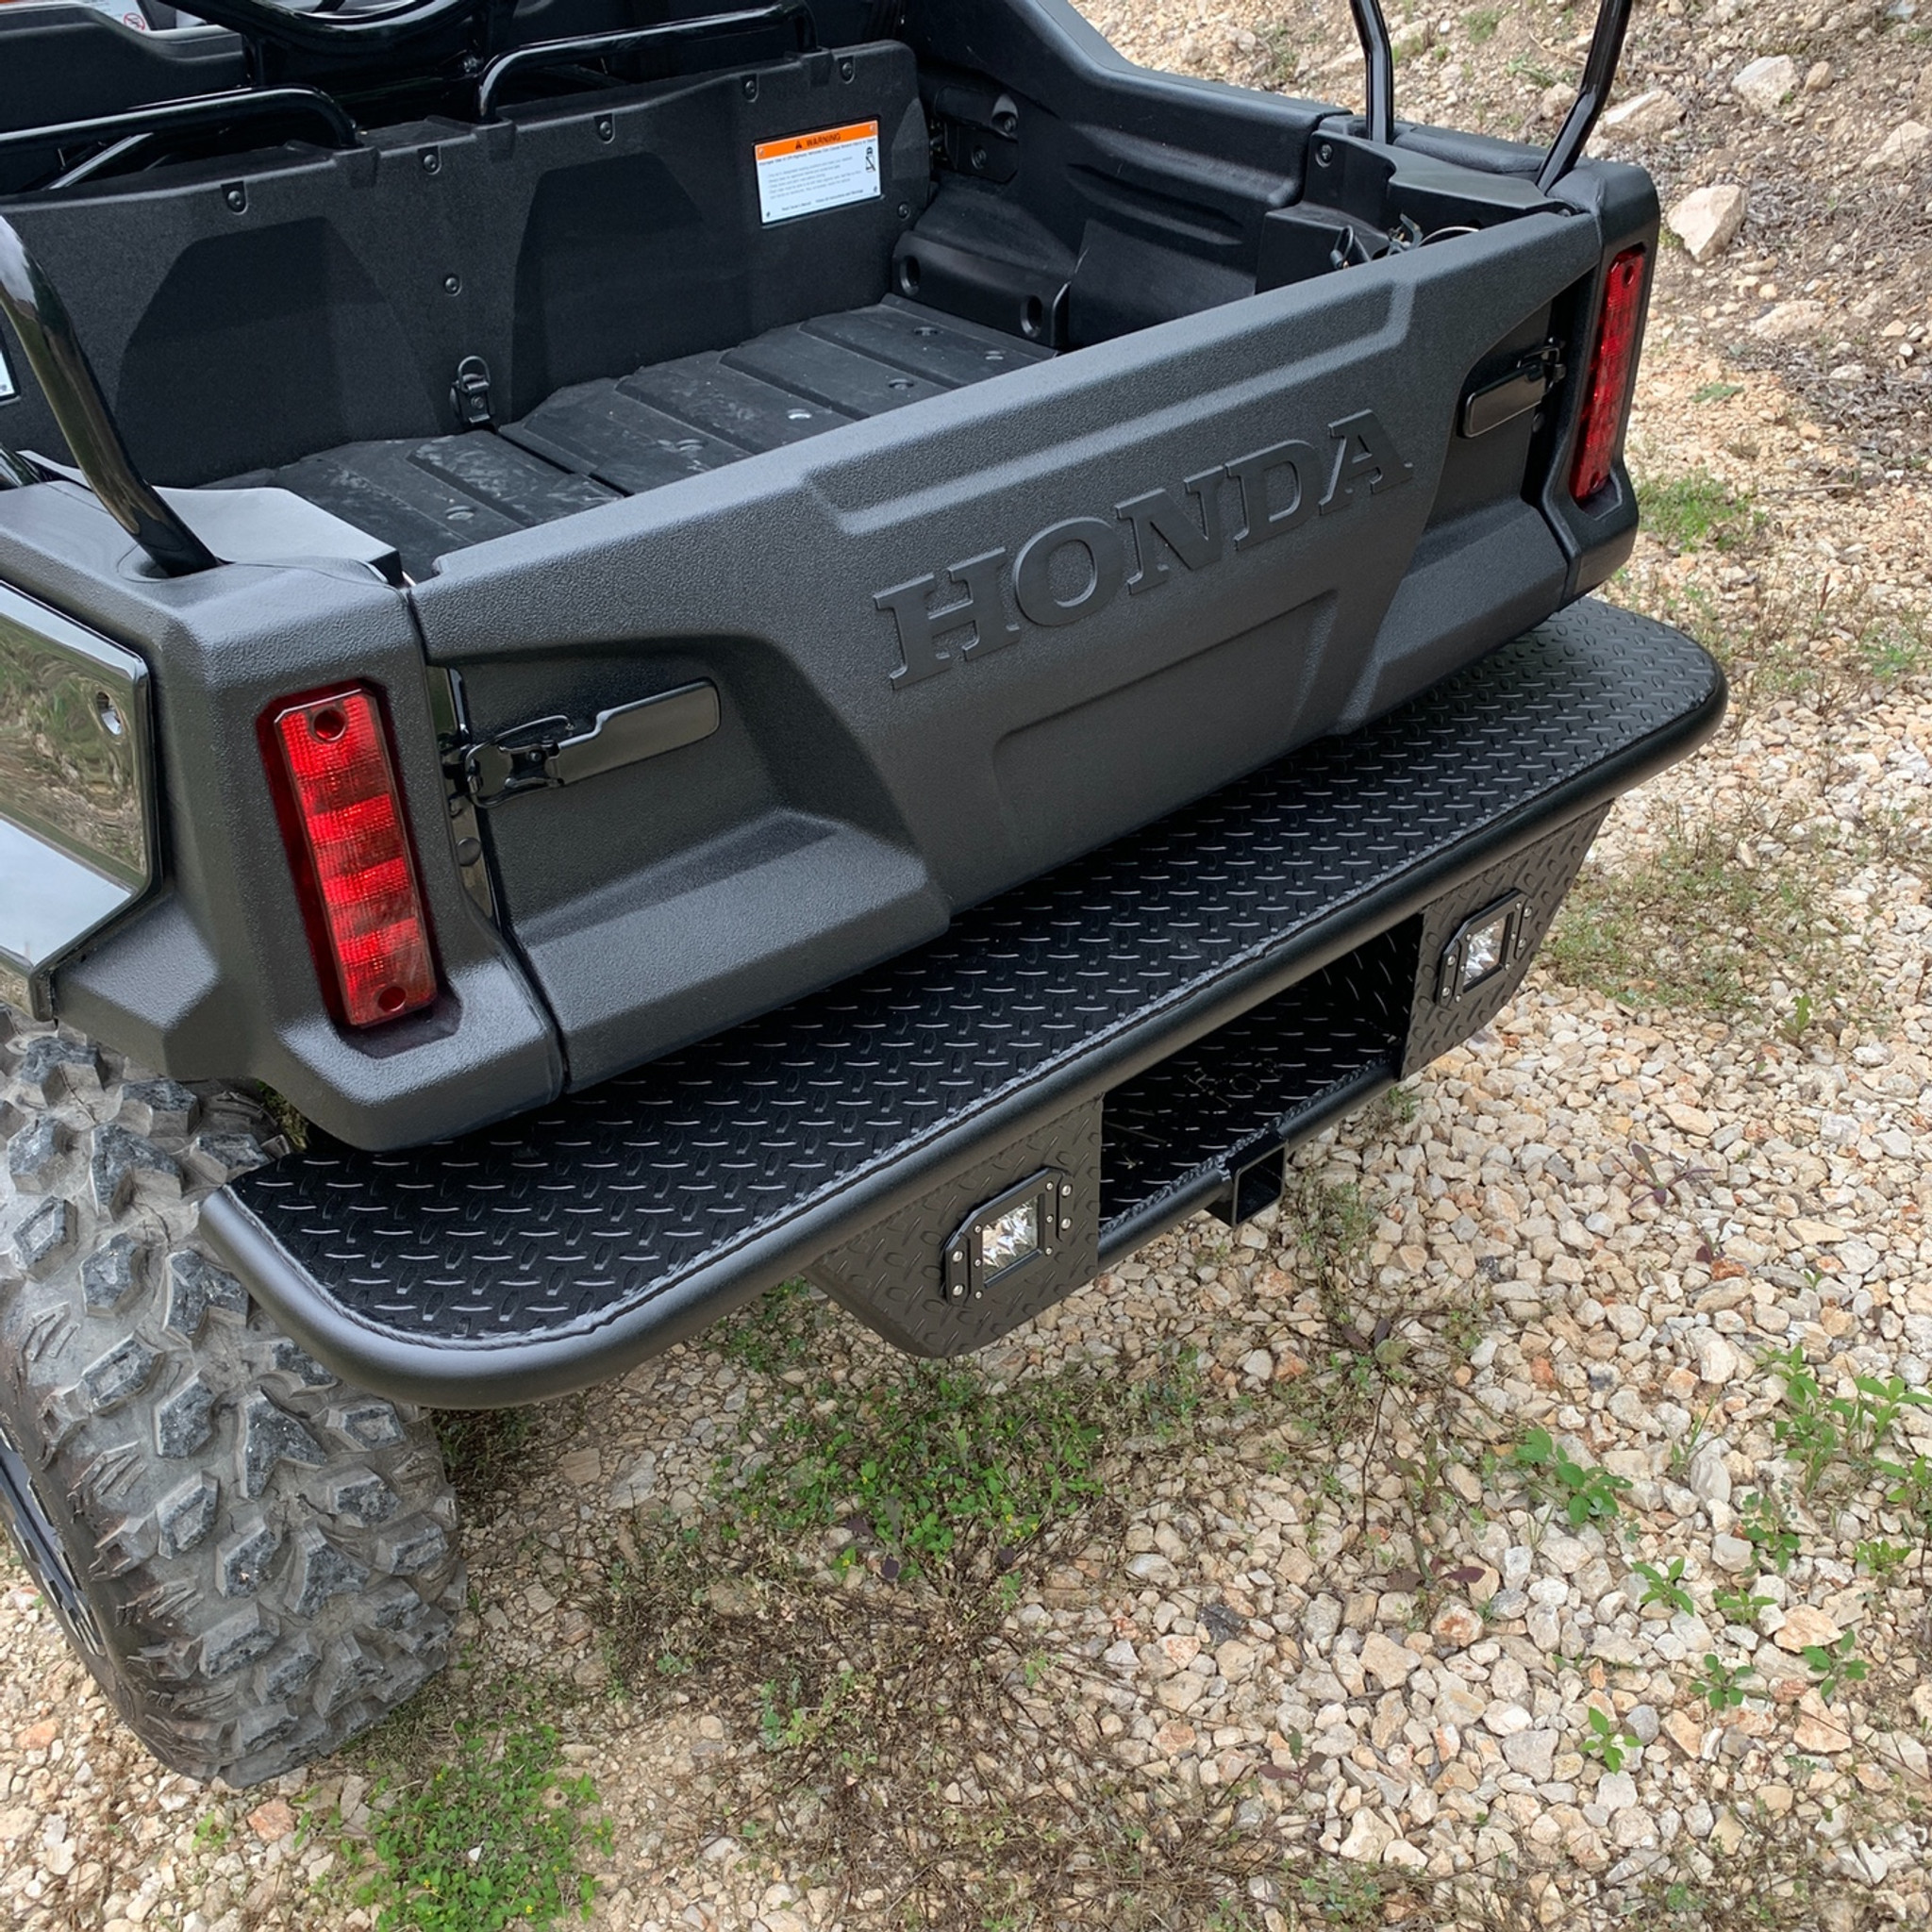 Honda Pioneer Rear Bumper For 1000 3 With Step Built In By Ranch Armor